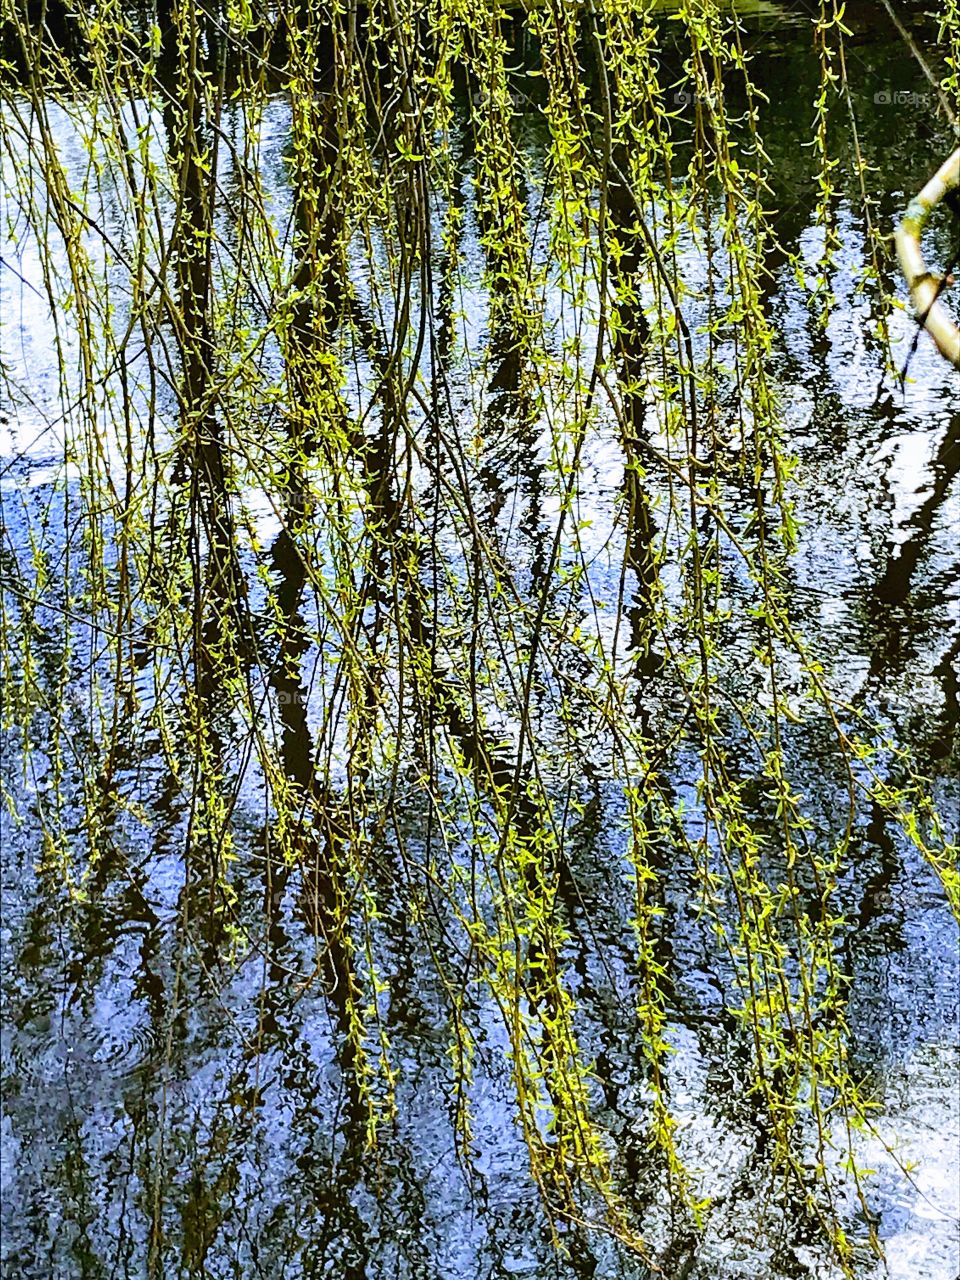 Weeping Willow in early spring